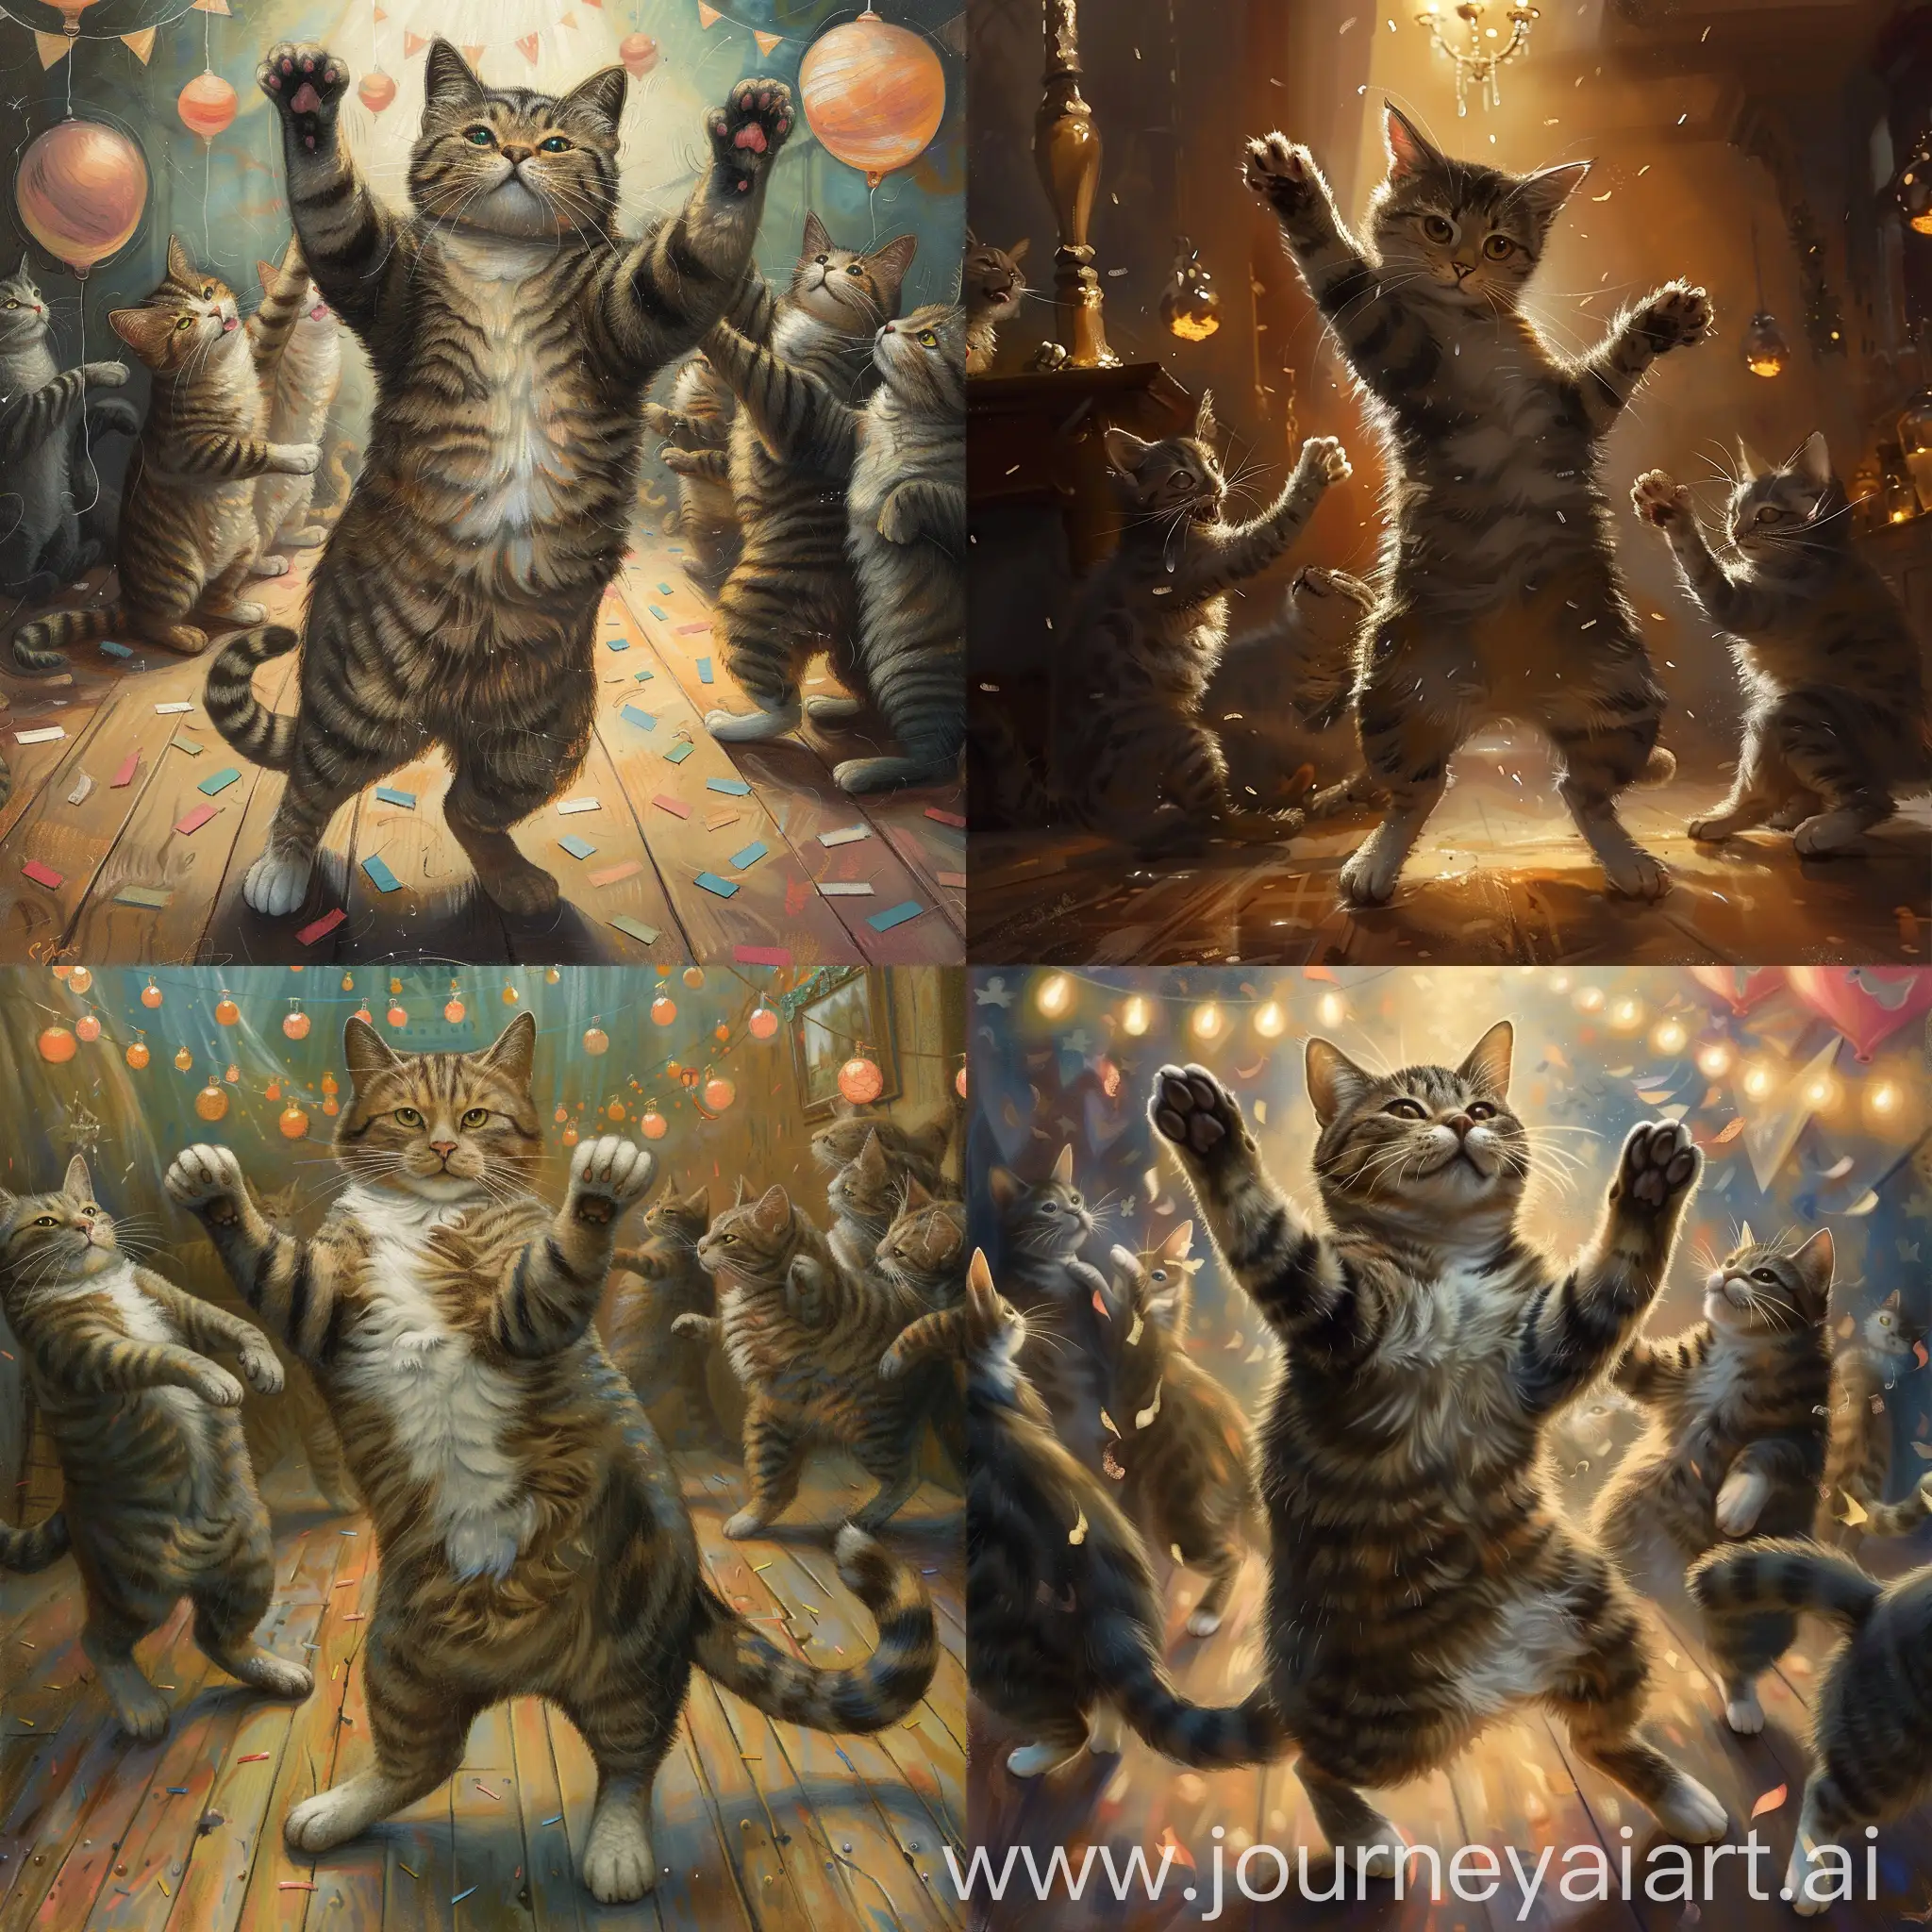 A cat dancing in a party with other cats